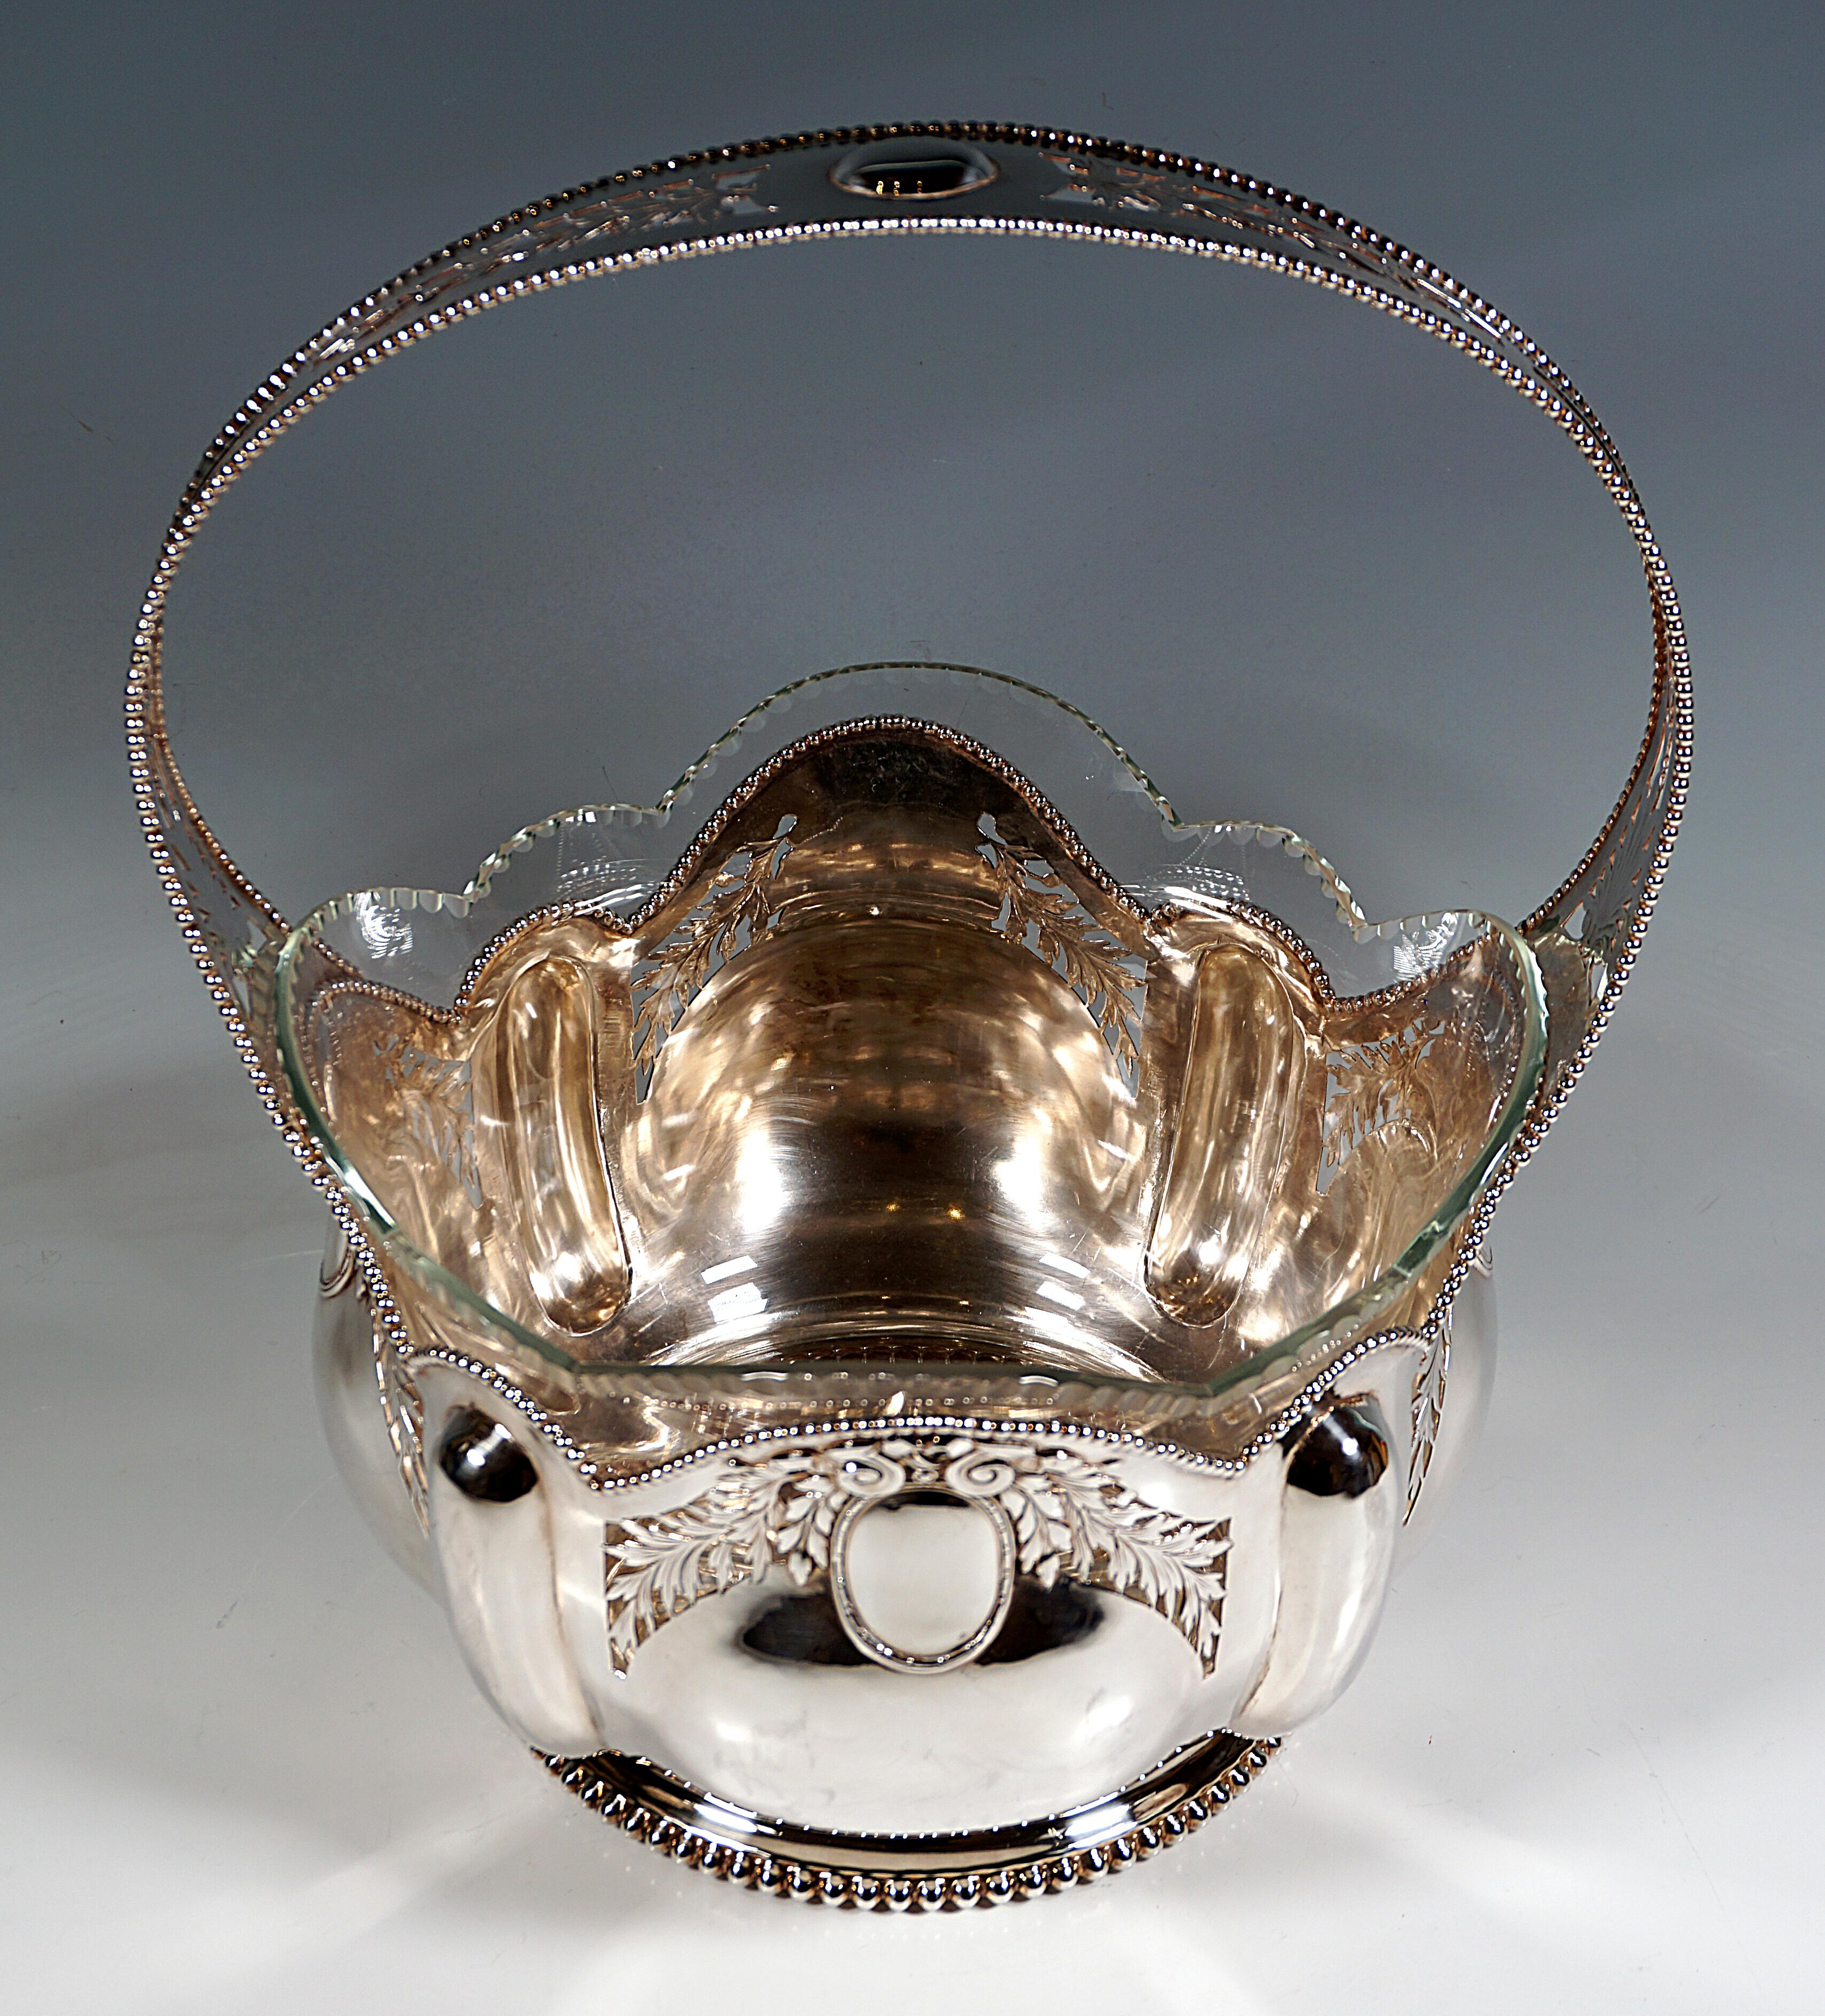 Elegant Art Nouveau silver centerpiece:
Body on a round stand stepped by a fluting and with an embossed beaded rim, vessel widening rhythmically in differently sized, tongue-shaped bulges, openwork decoration in four places with medallions